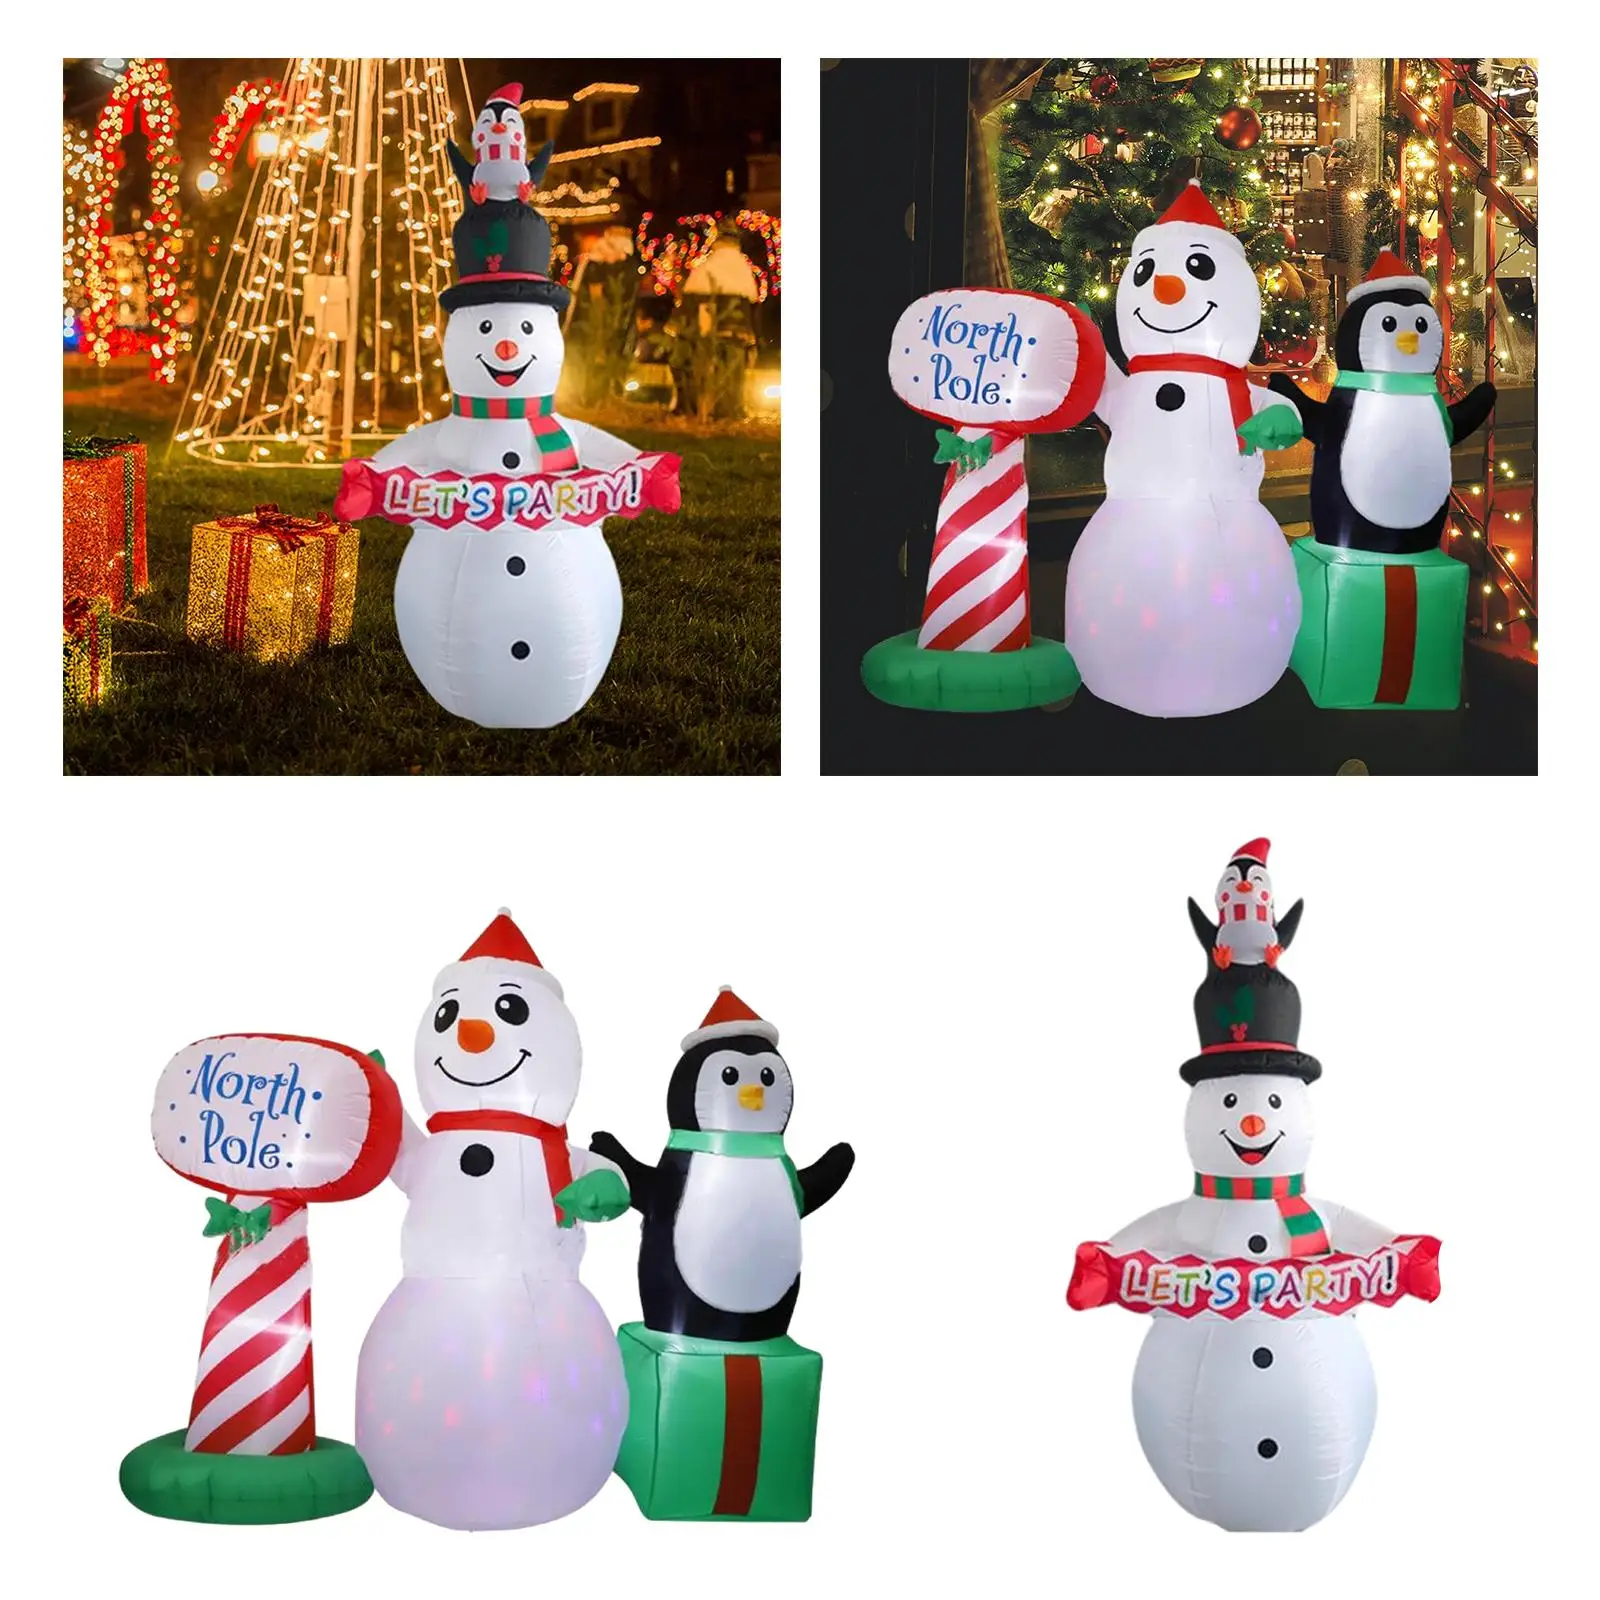 Inflatable Snowman Luminous Large Ornament with LED Lights Christmas Decor Blow up Snow Man for Lawn Winter Xmas Indoor Party